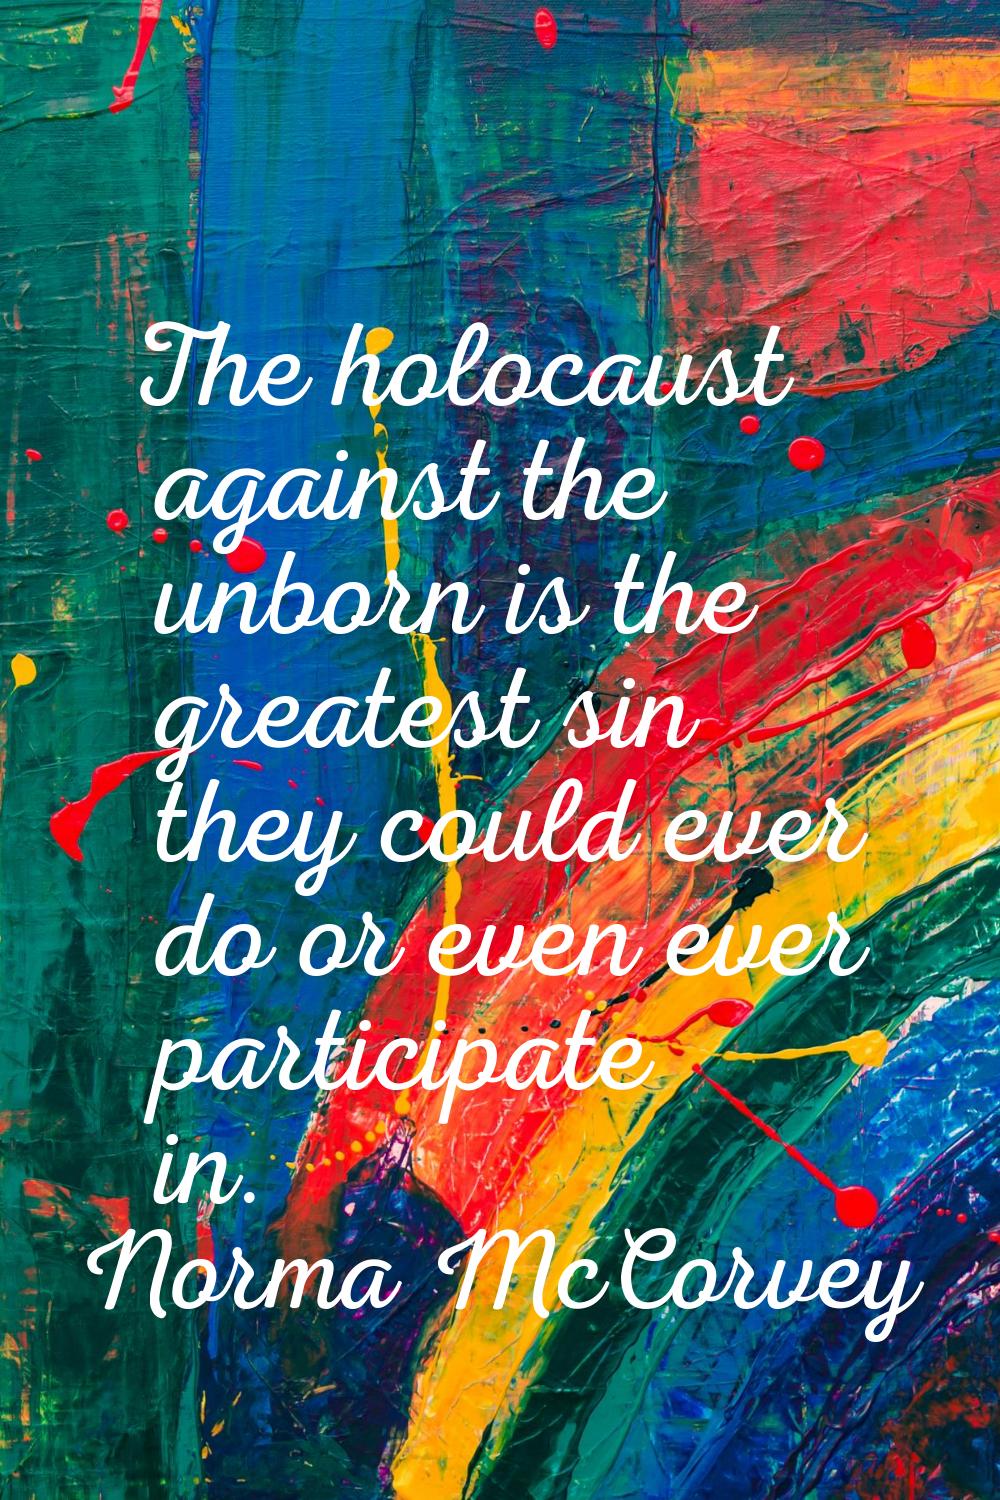 The holocaust against the unborn is the greatest sin they could ever do or even ever participate in